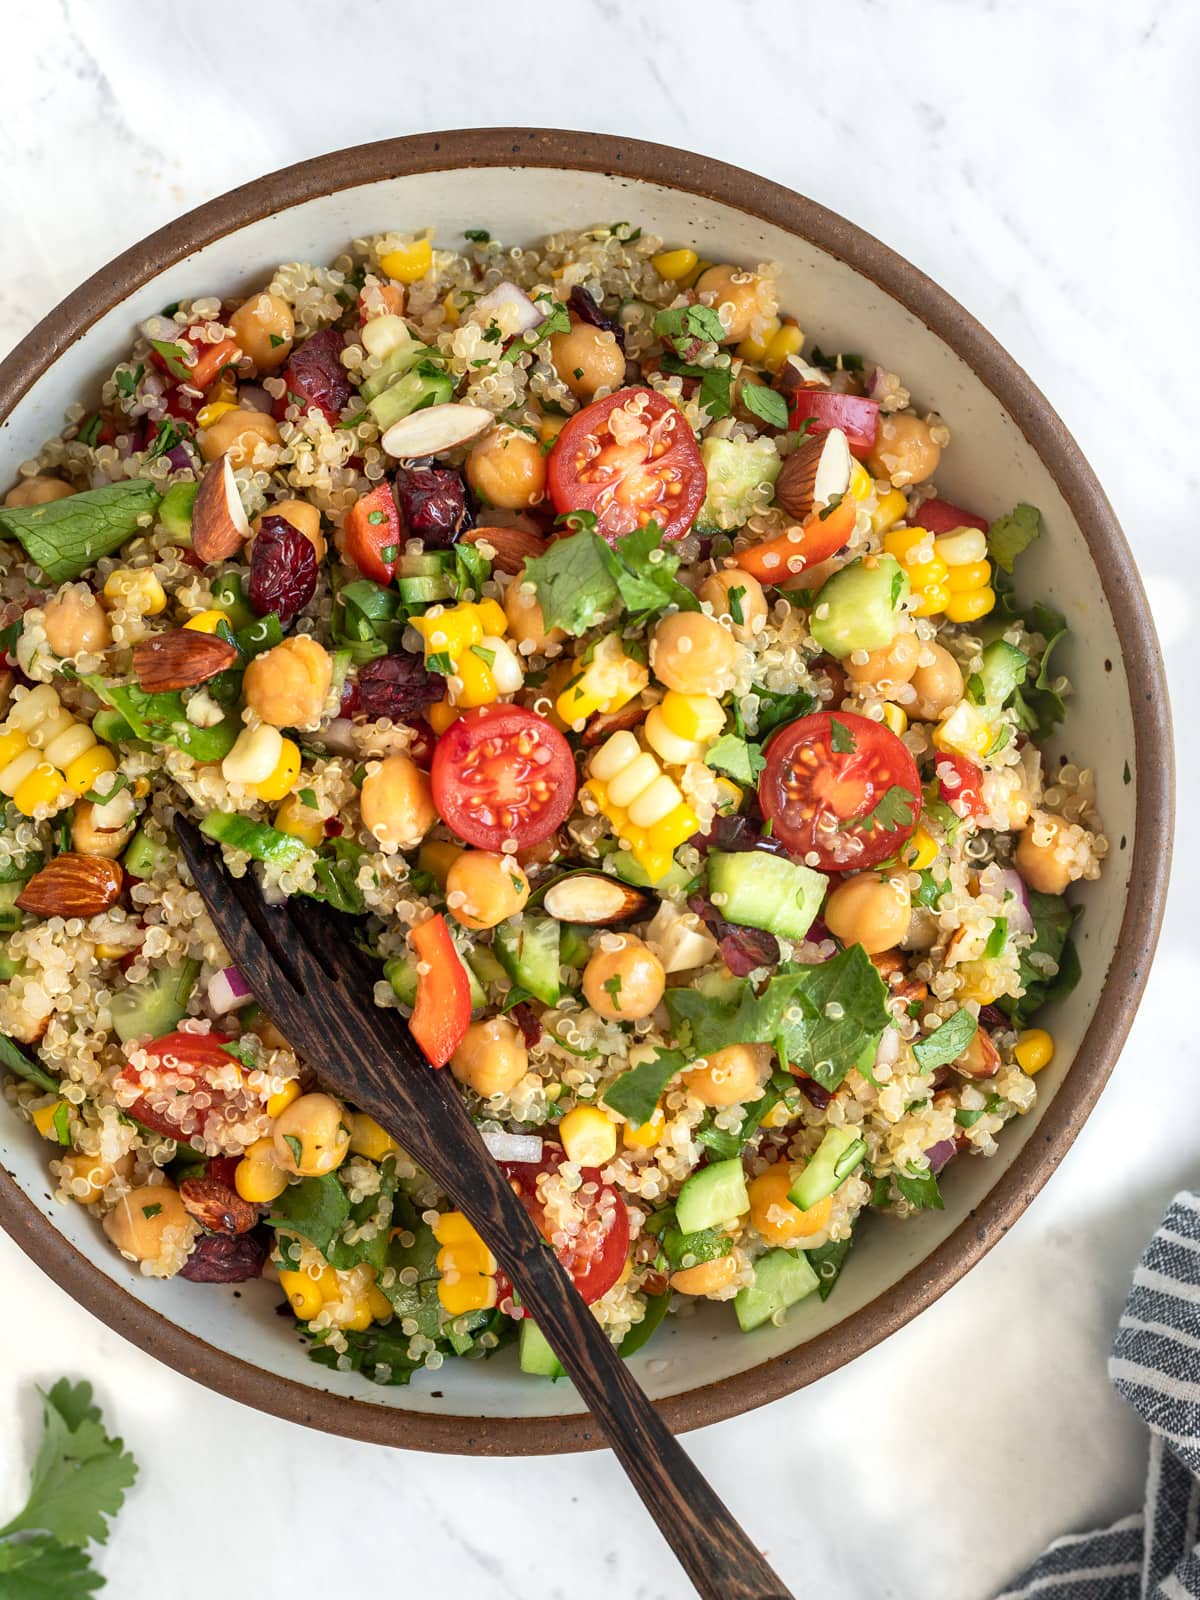 Bowl of quinoa salad packed with veggies like corn and tomatoes.